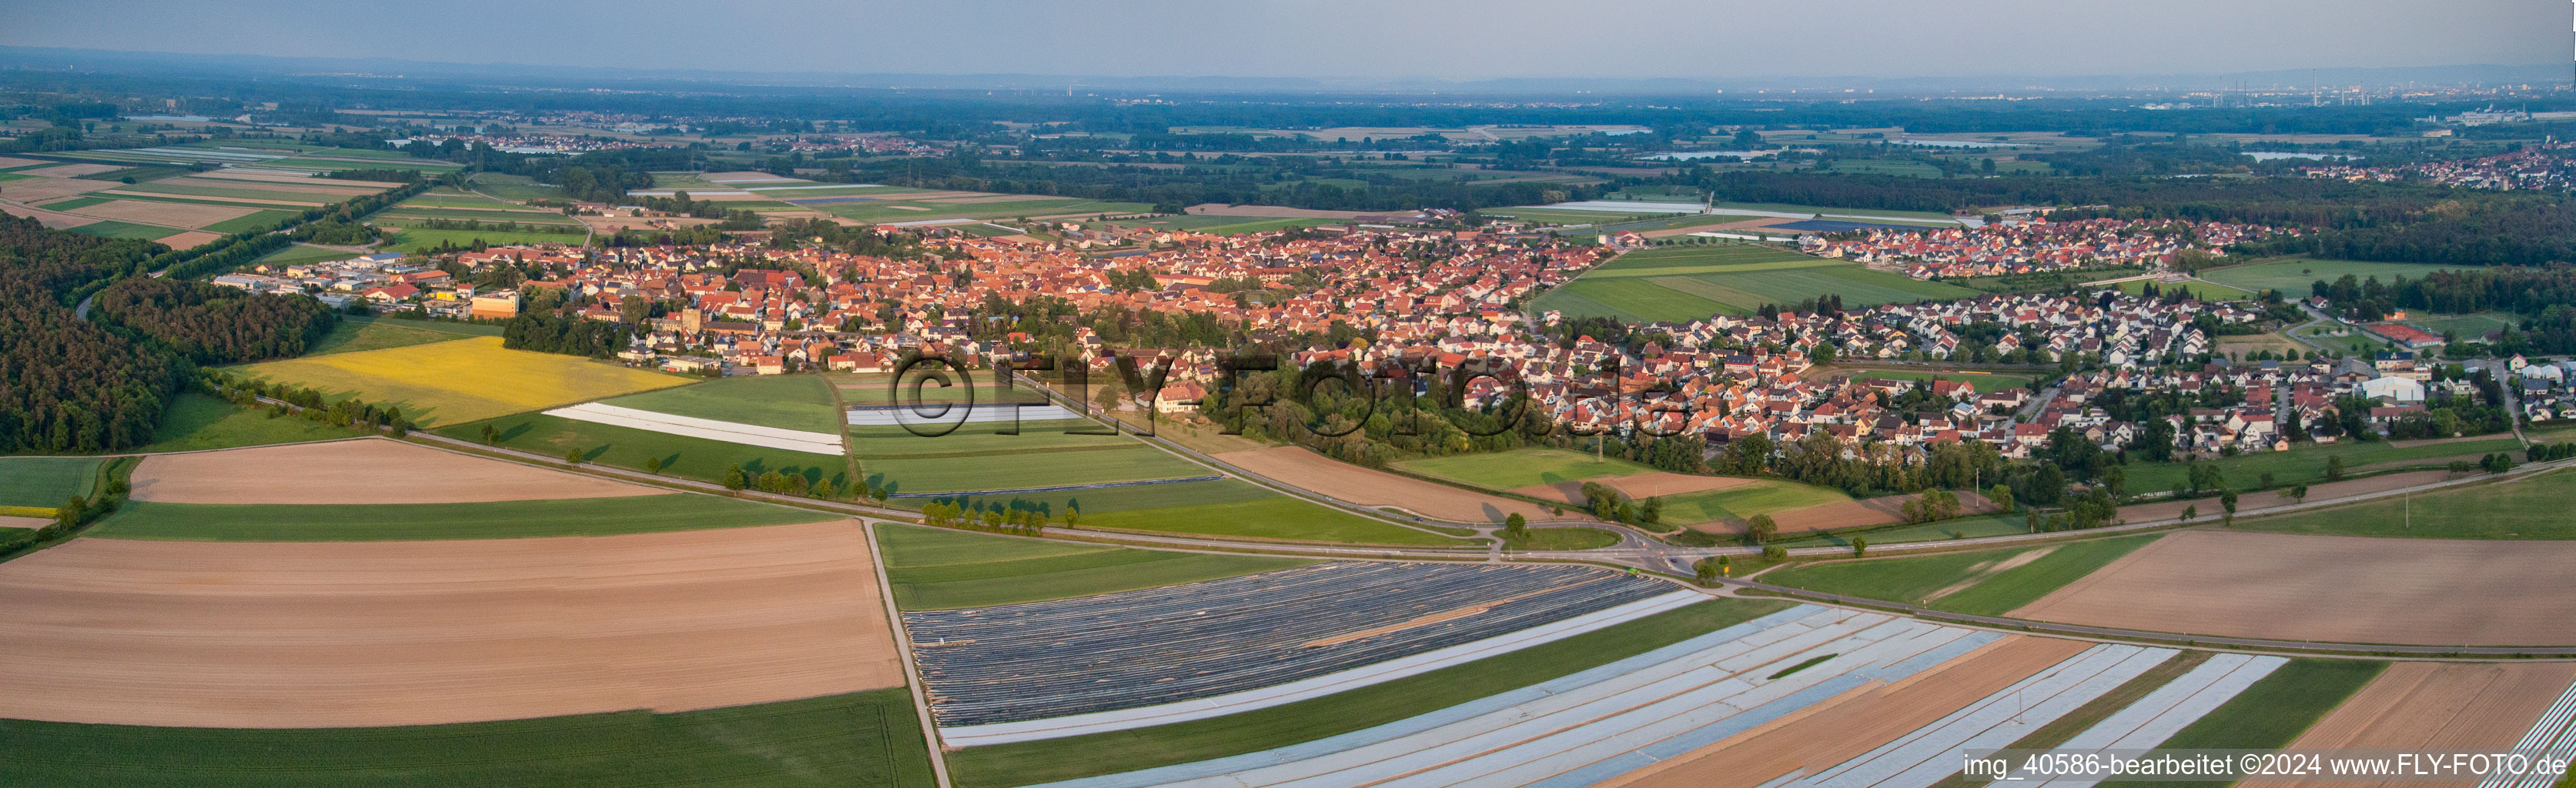 Panoramic perspective of Village - view on the edge of agricultural fields and farmland in Rheinzabern in the state Rhineland-Palatinate, Germany